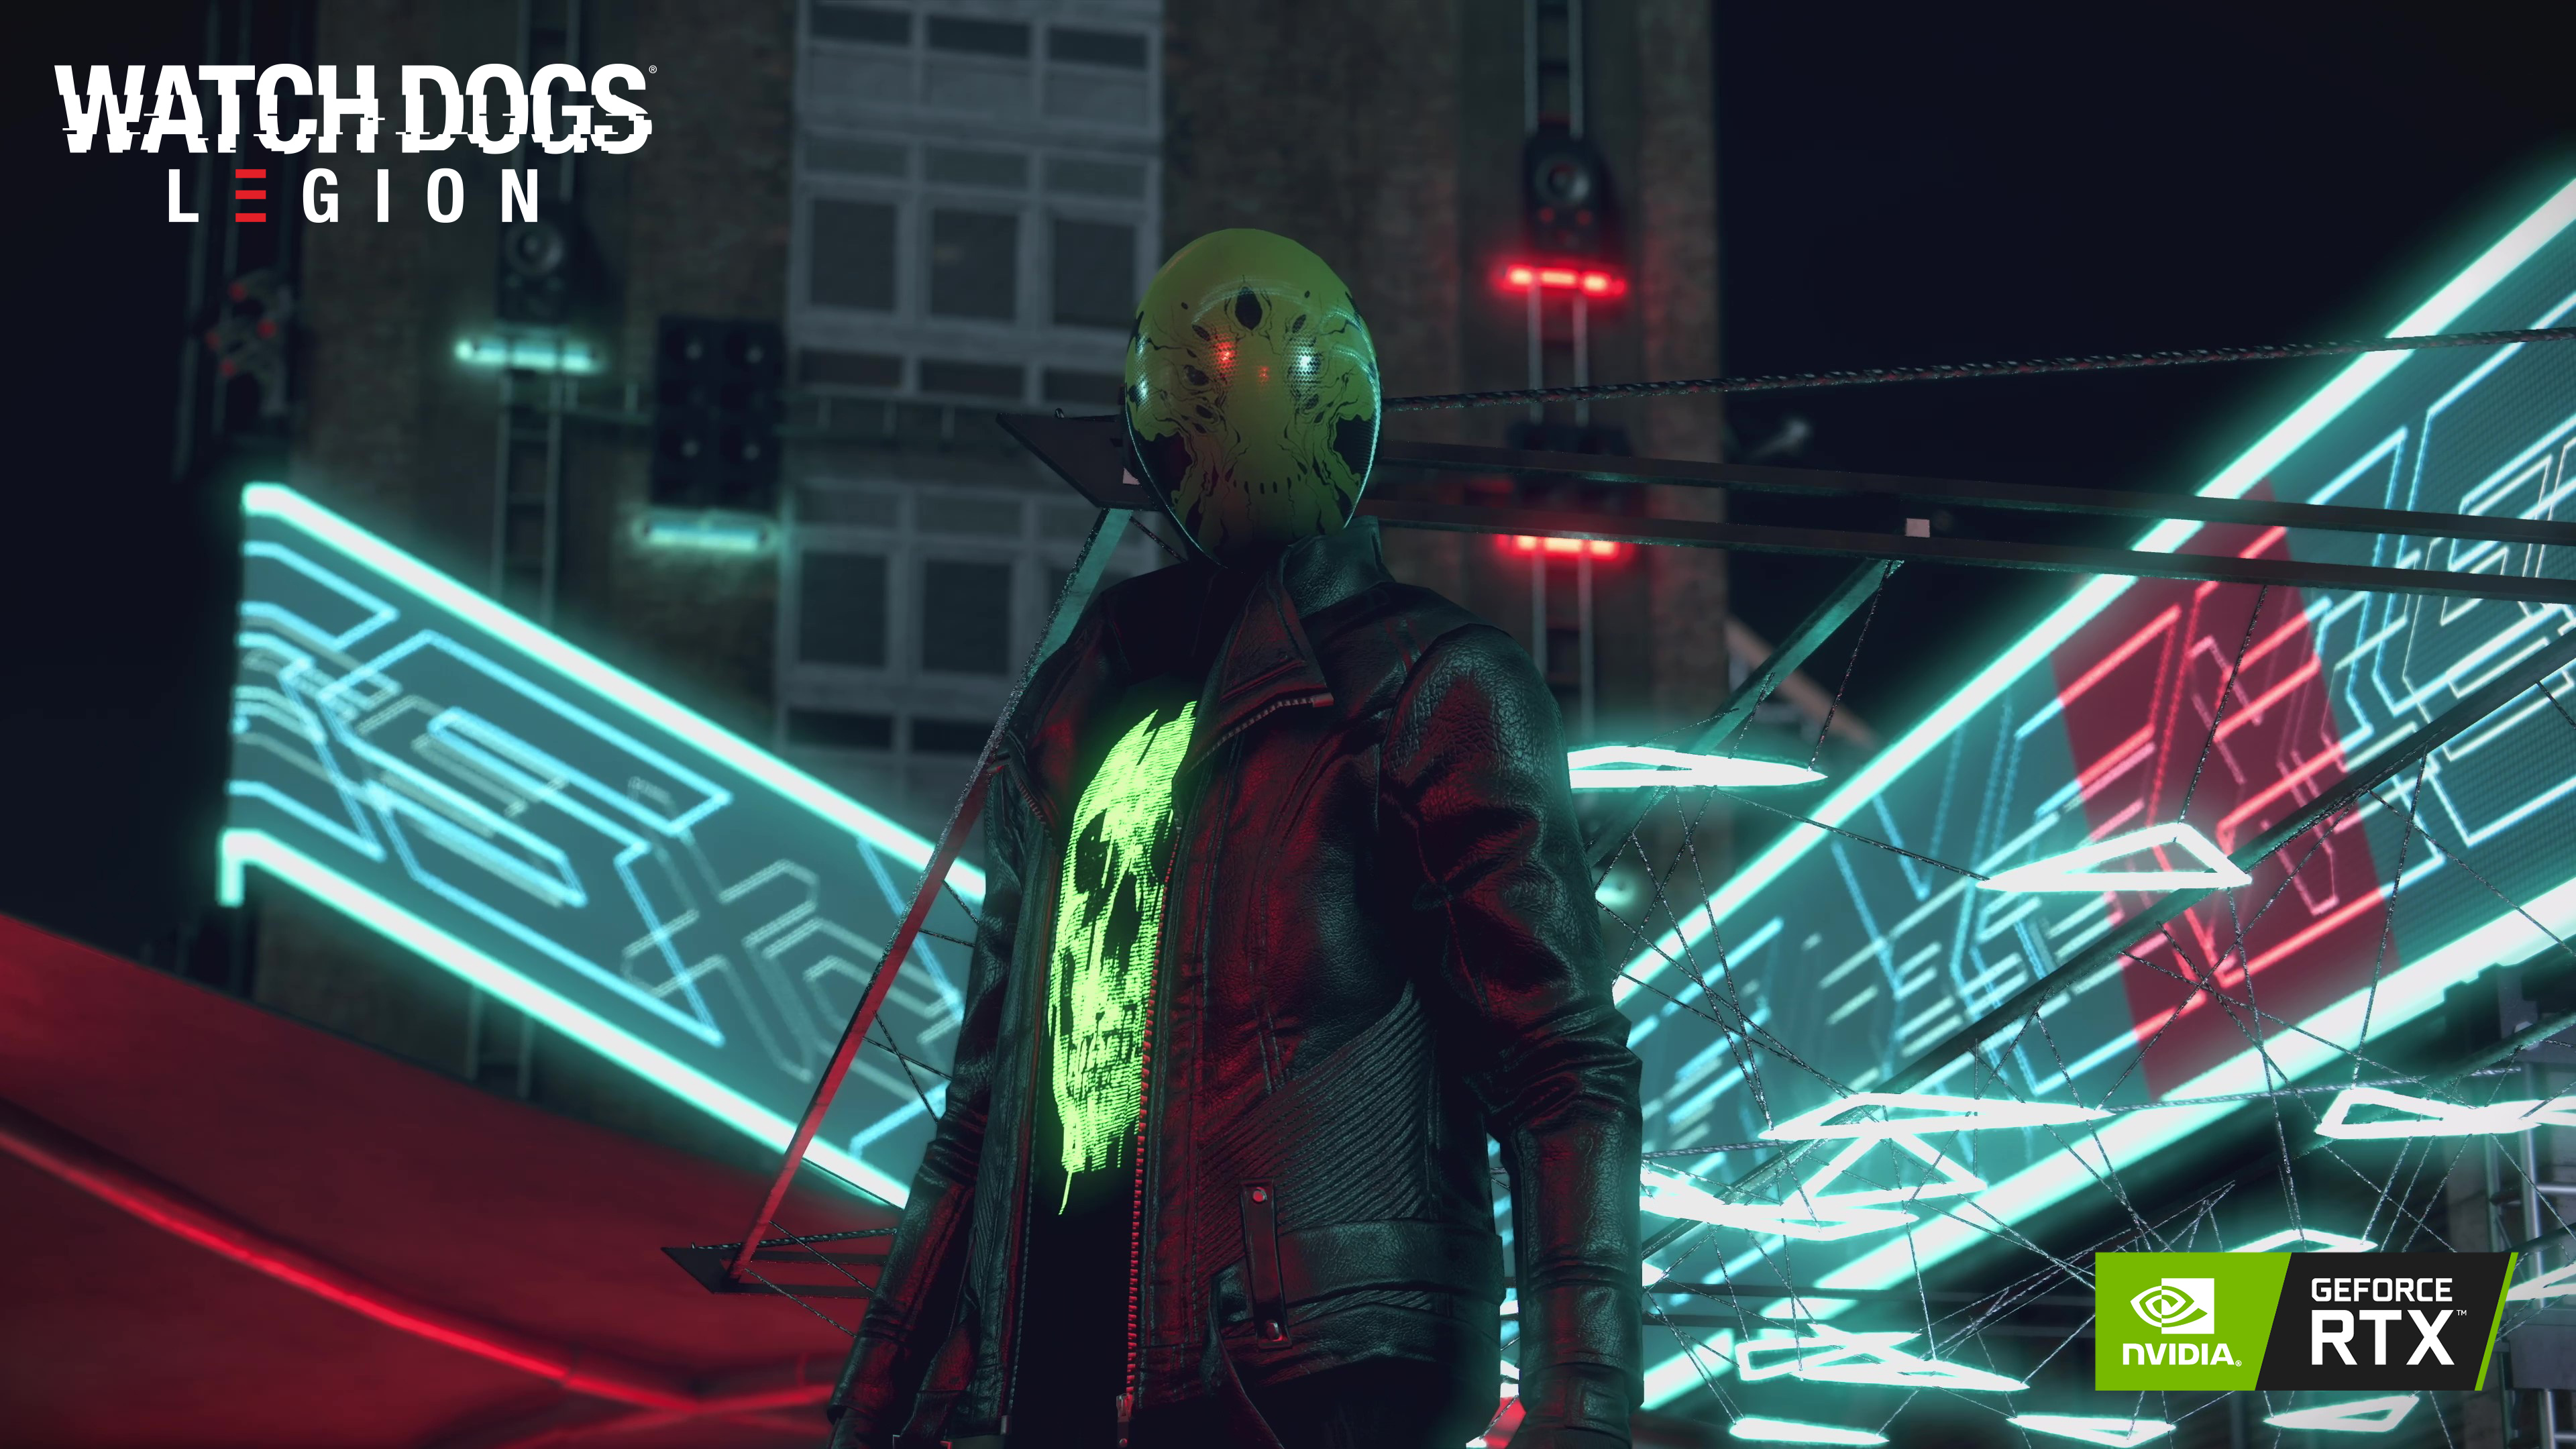 Watch Dogs: Legion Mods Are About To Get Wild As Source Code Leaks